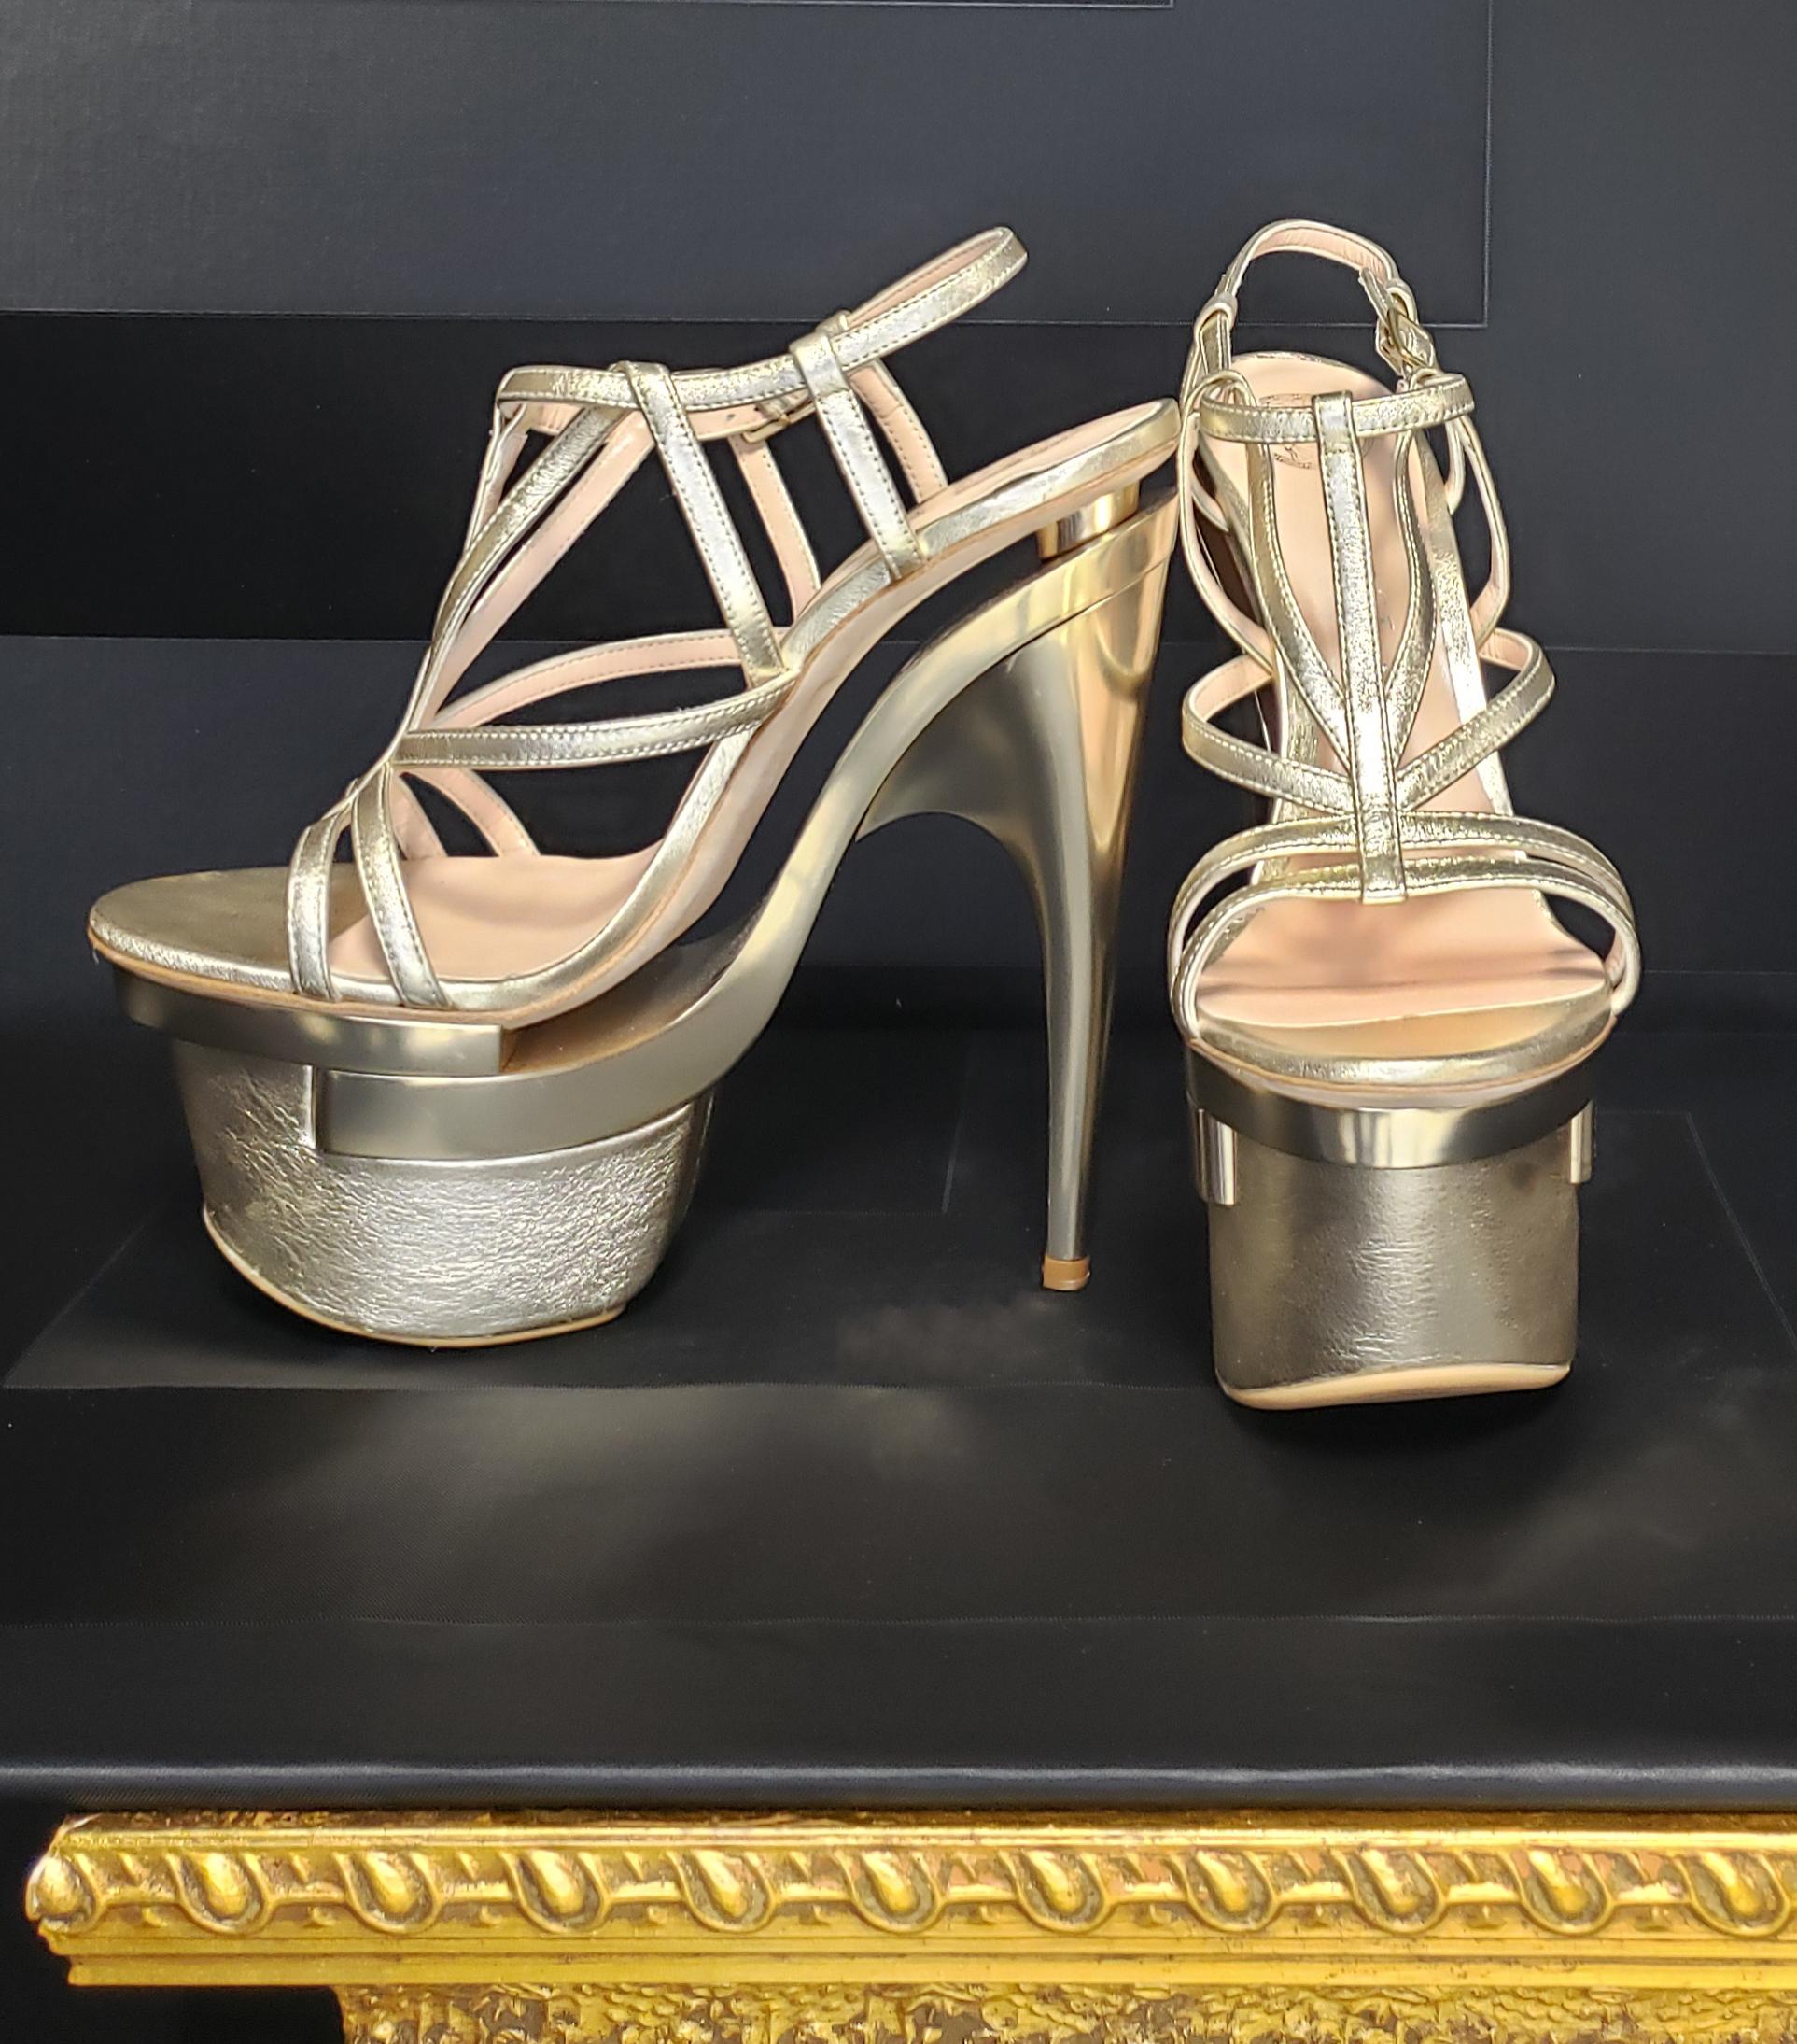 VERSACE
New sandal reaches new heights of show-stopping style in gold metallic leather with sexy platform. 
    Color: GOLD 
Content: 100% Leather
Leather lining
 Heel measures  7''
Platform is about 2 1/2